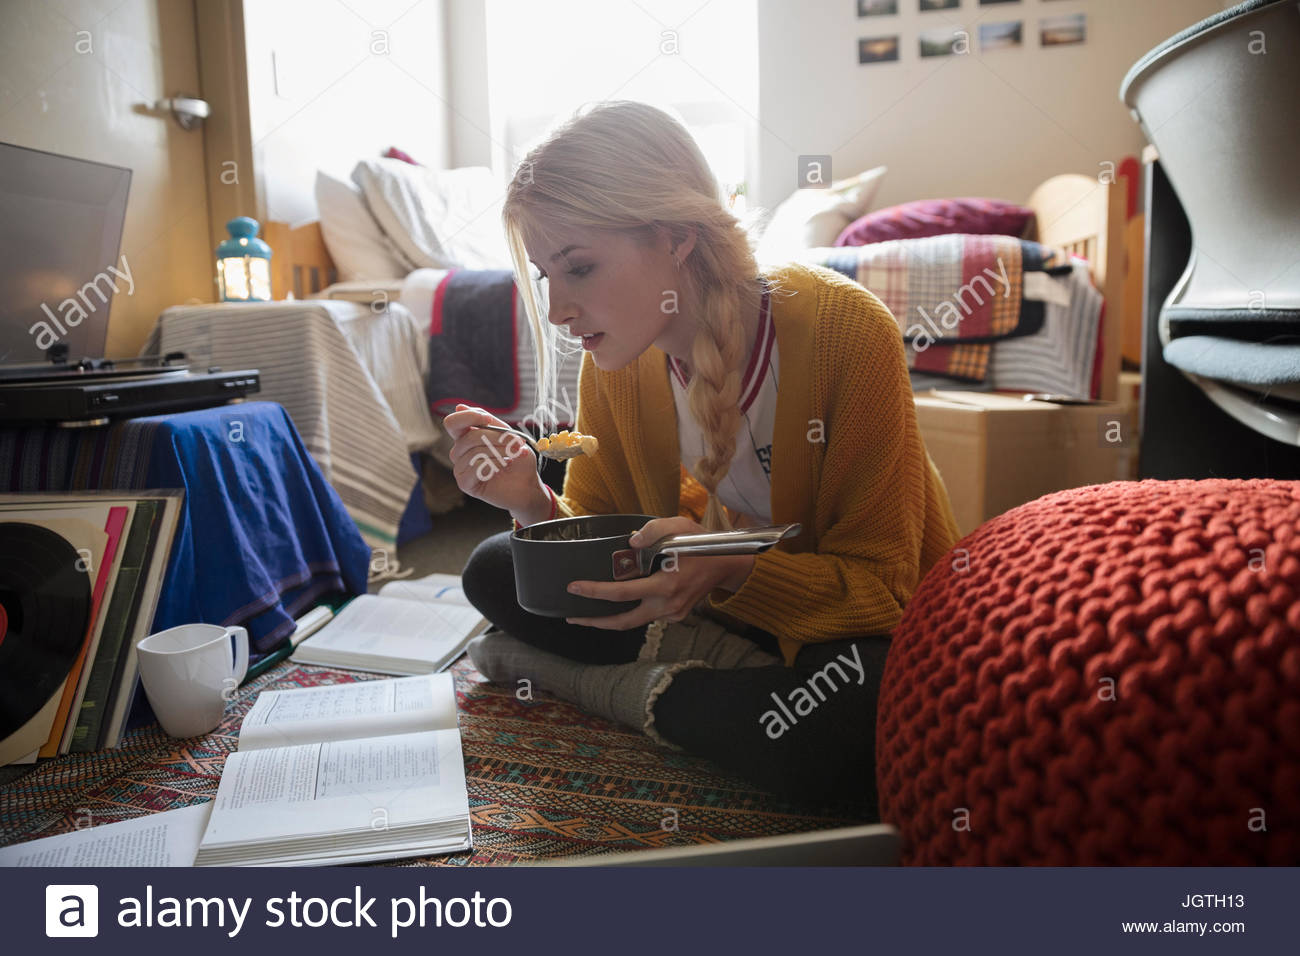 Female college student eating and studying on floor in dorm room Stock Photo